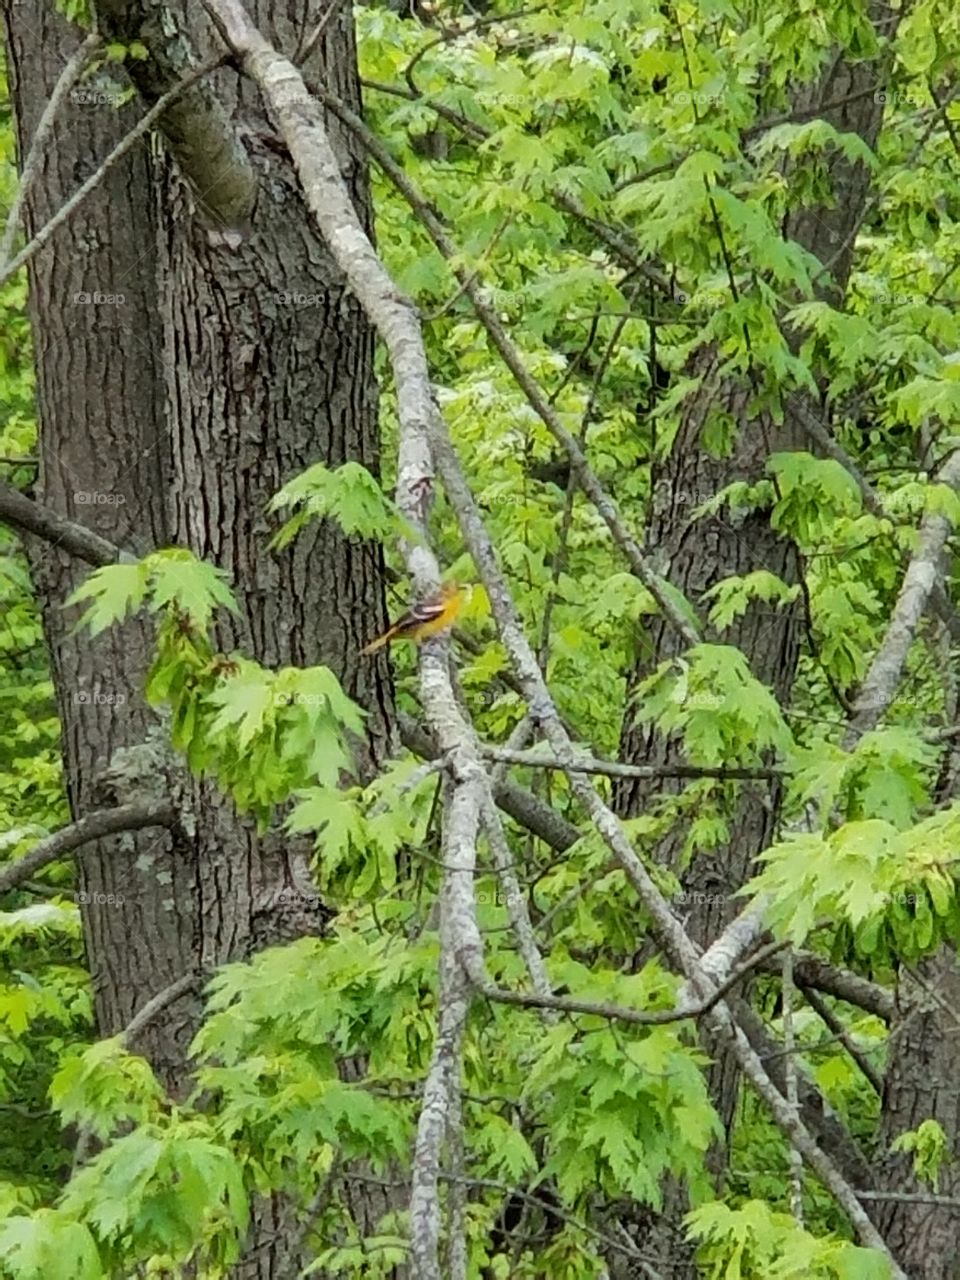 female Oriole in the park